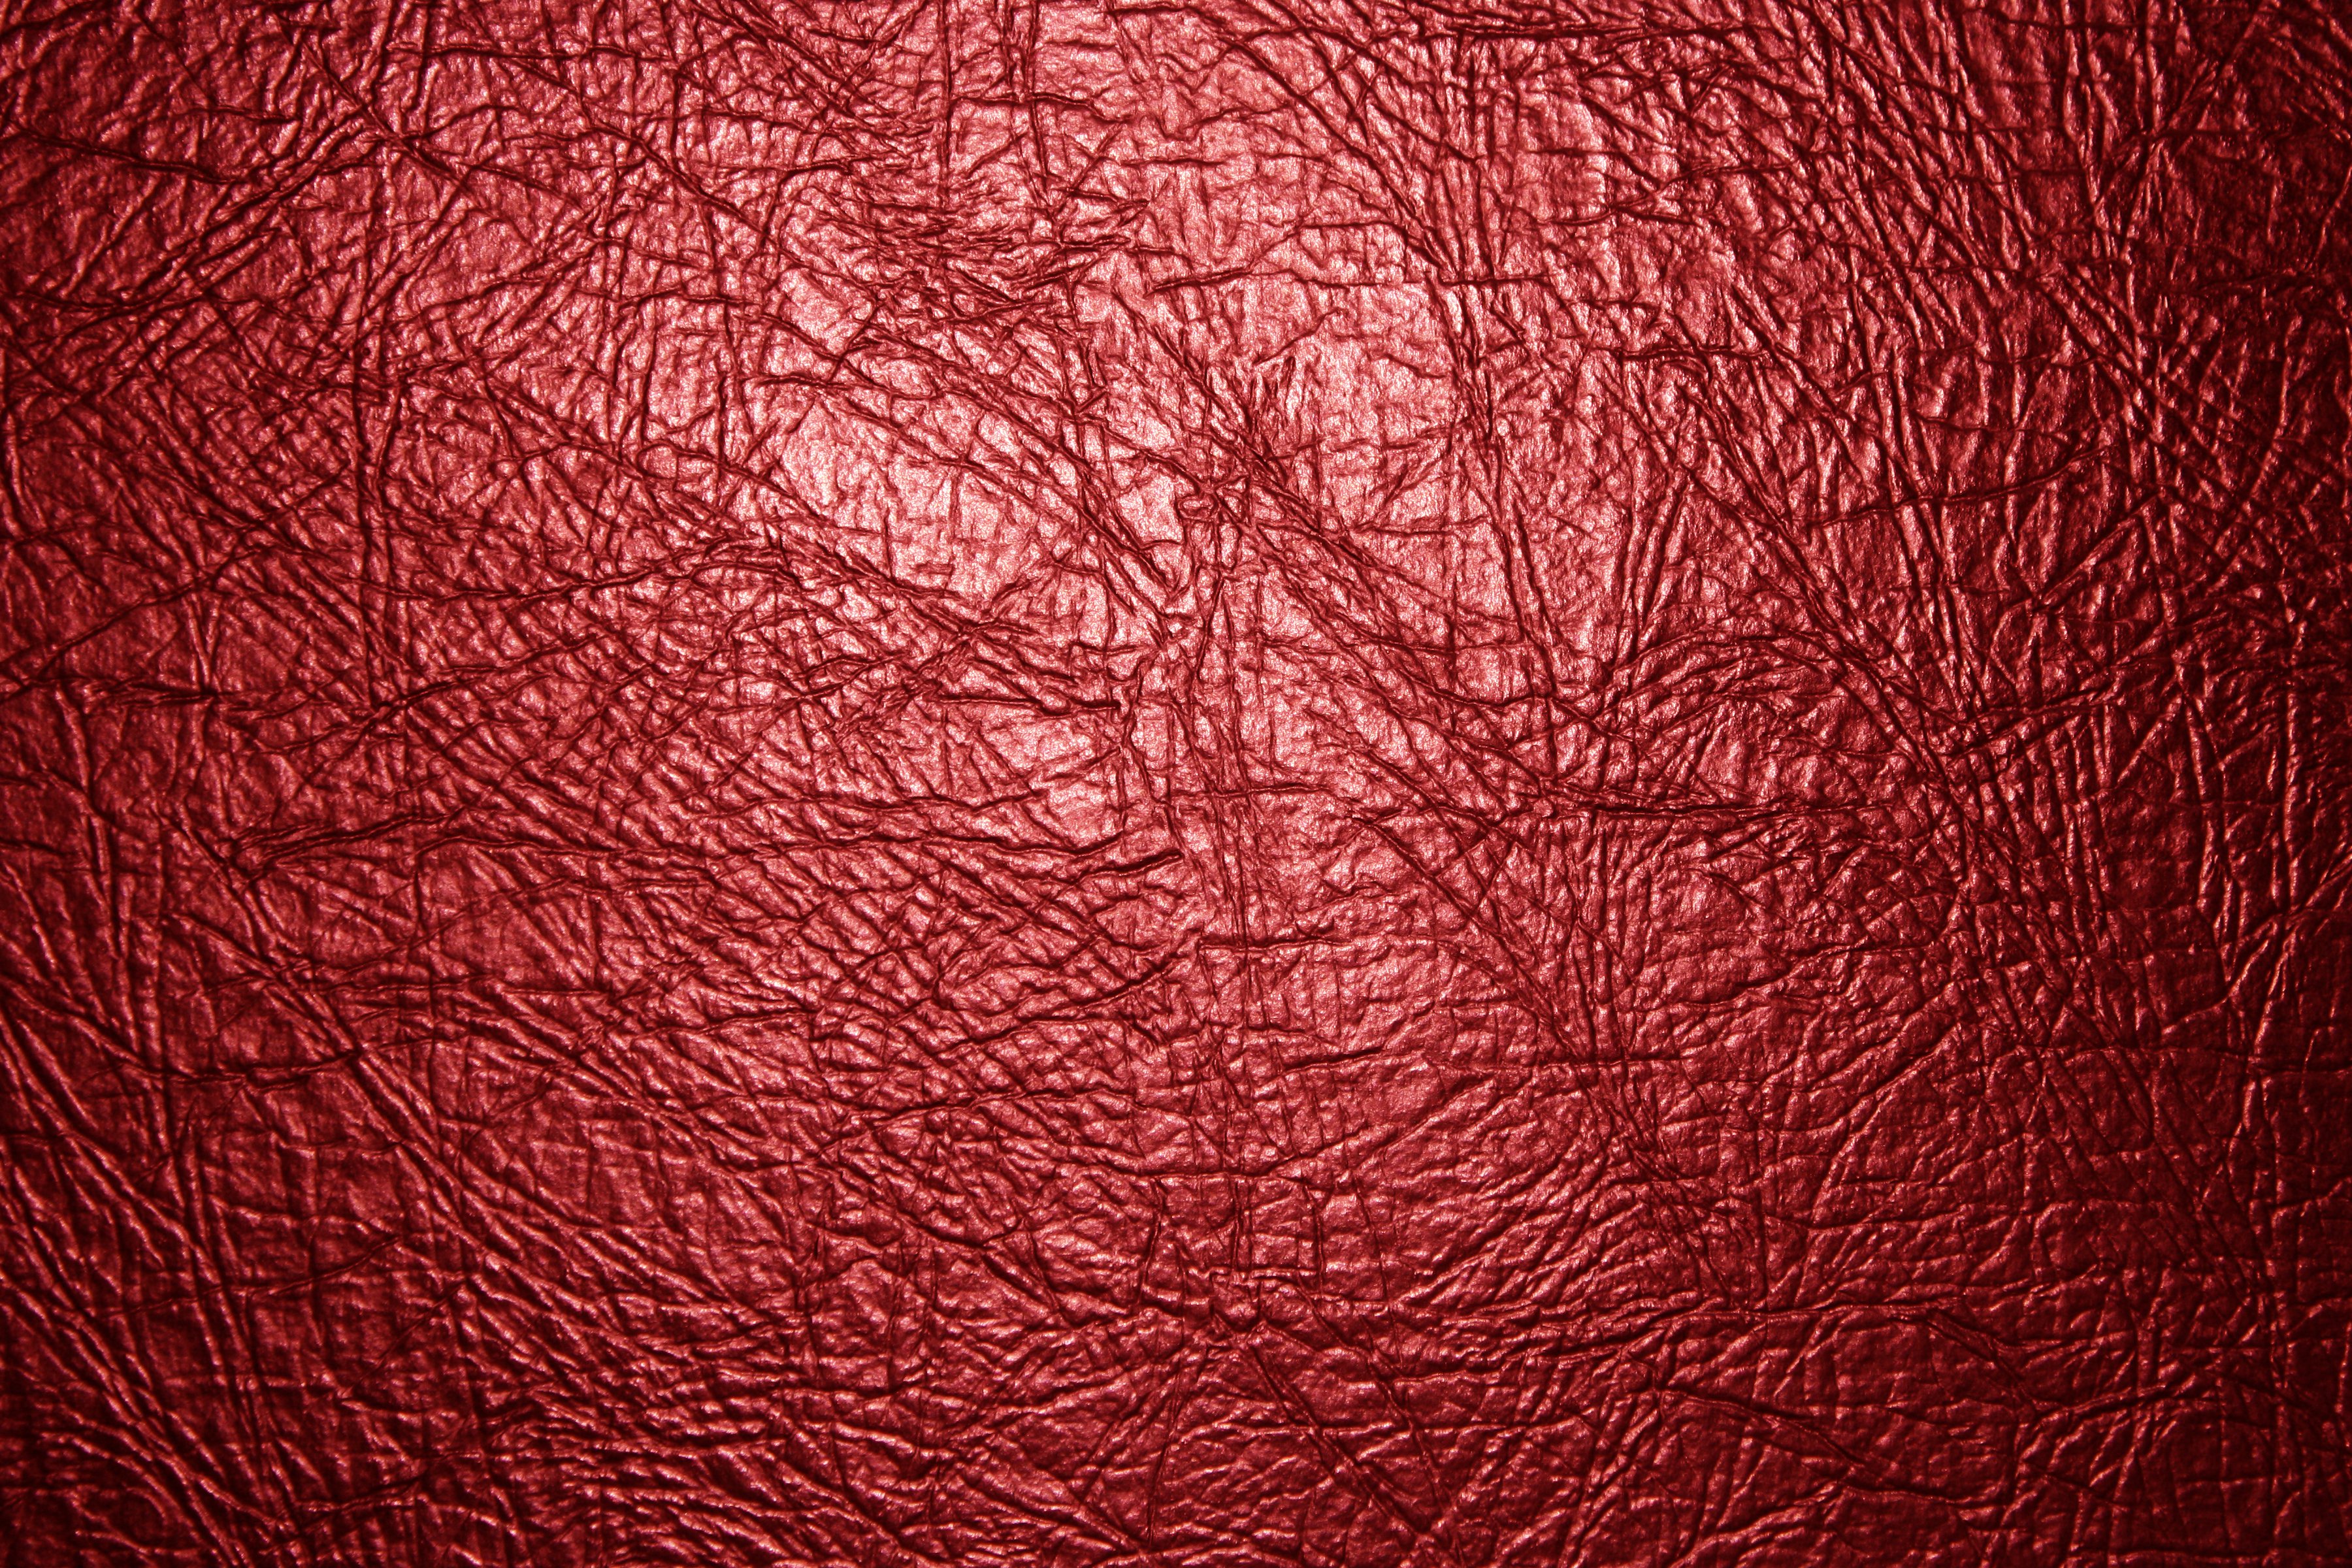 Red Leather Effect Background Free Stock Photo - Public Domain, Red Leather  